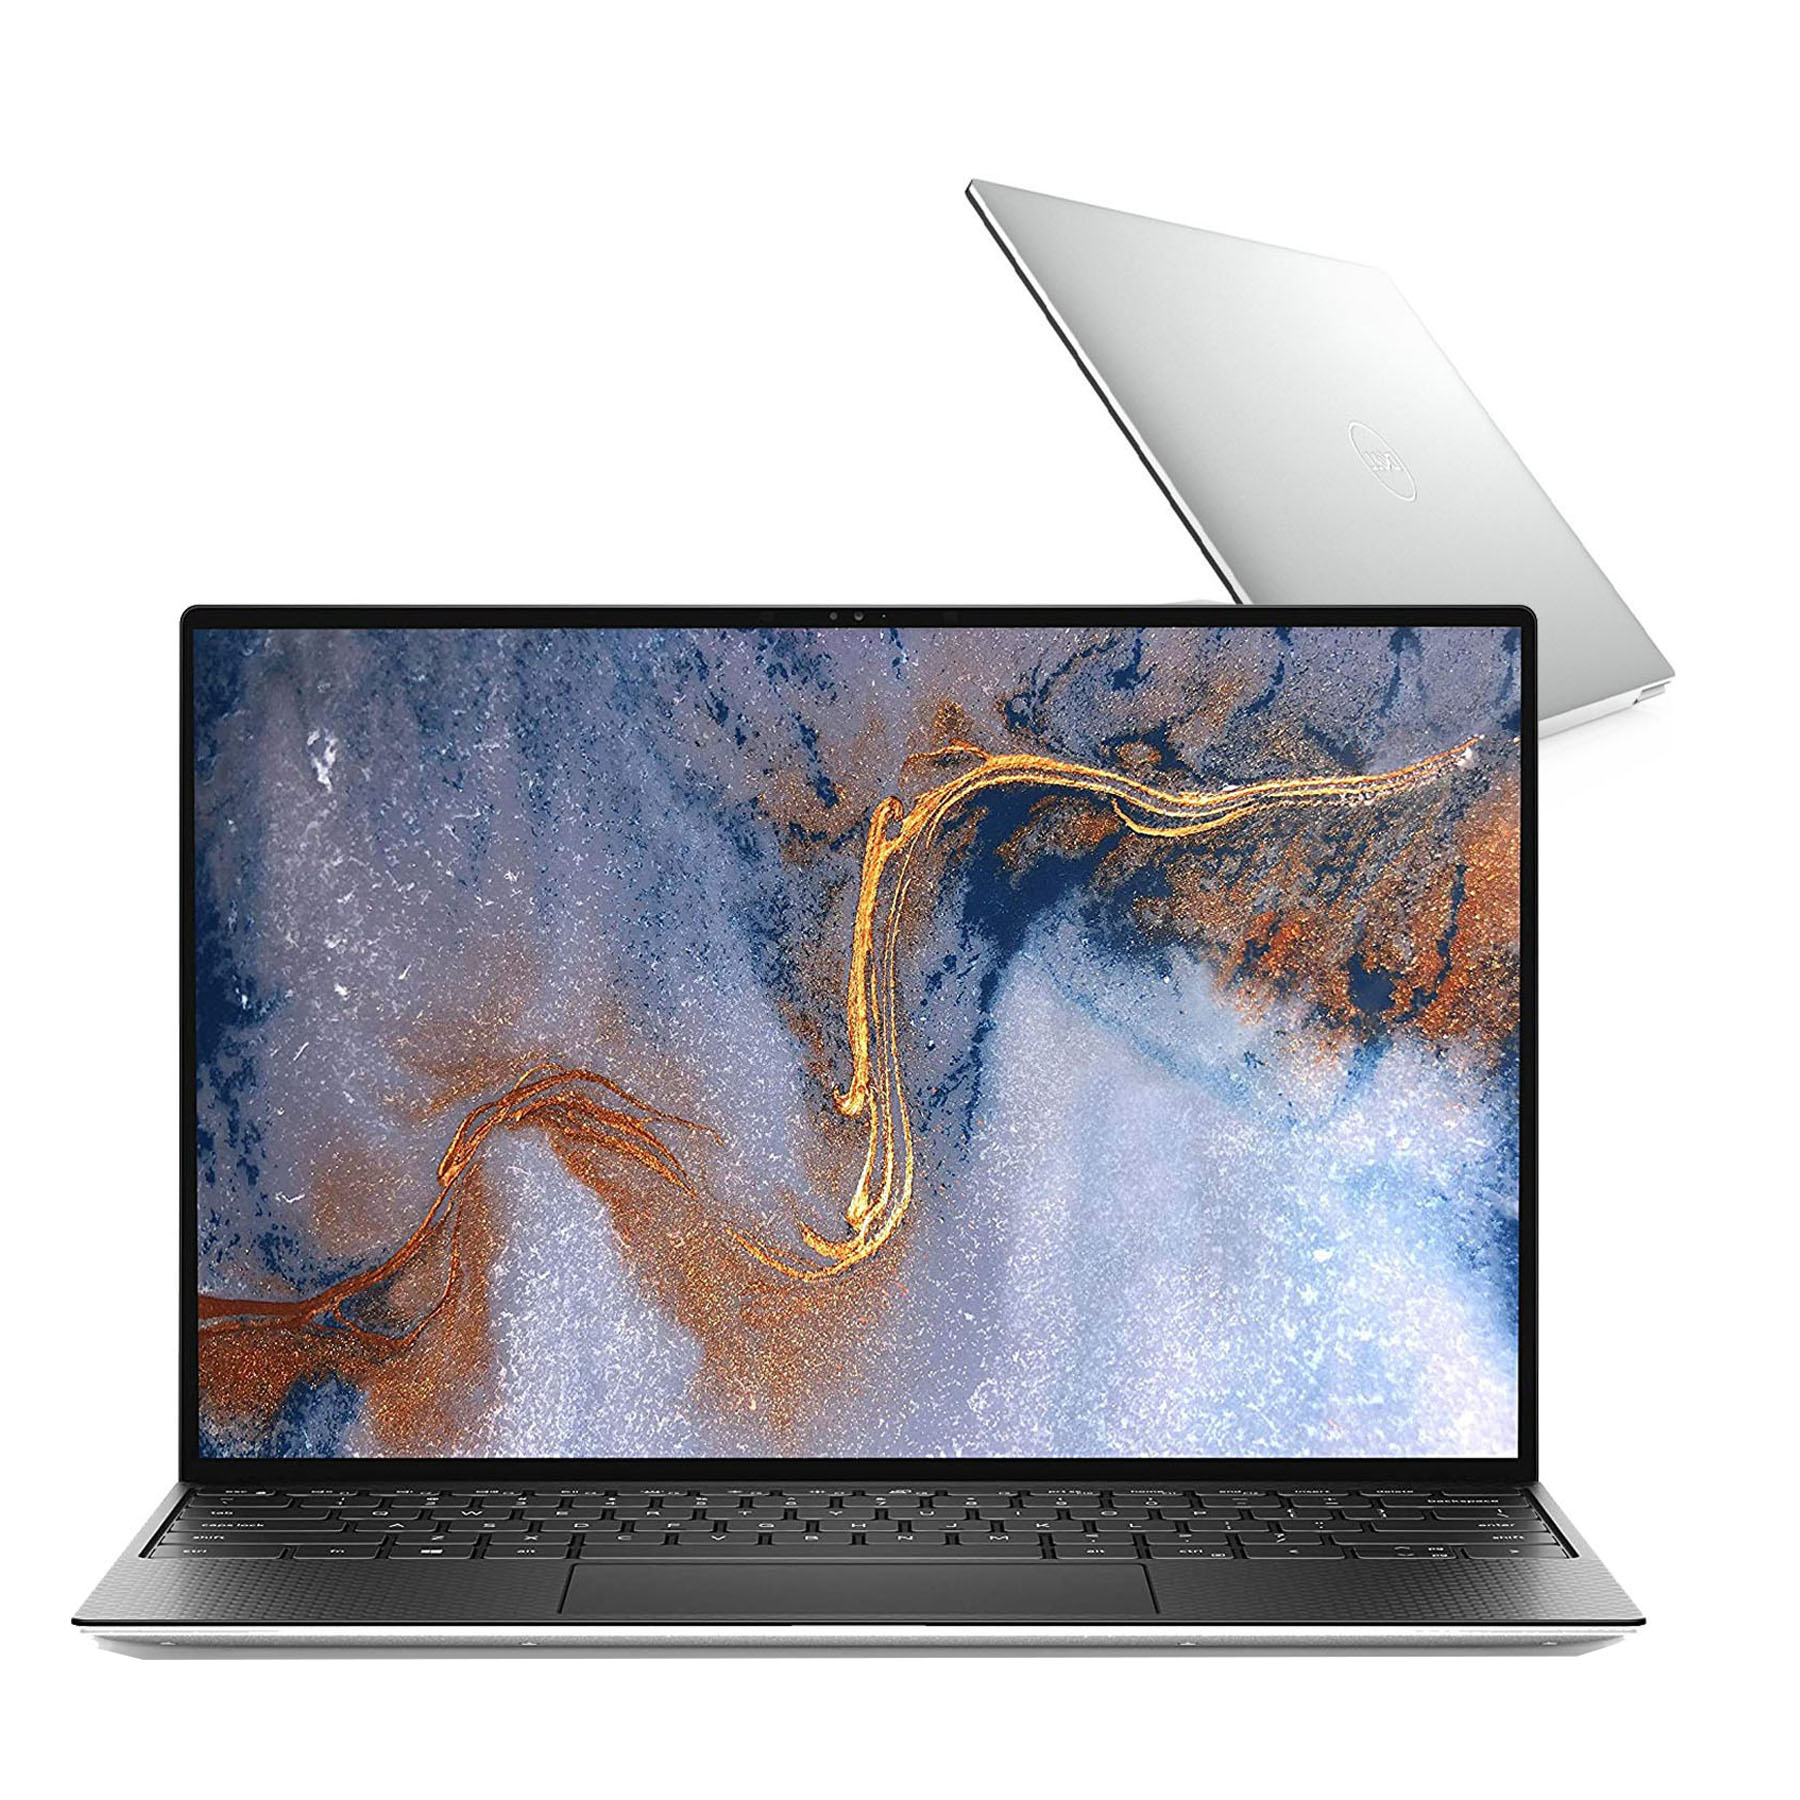 [Mới 100%] Laptop Dell XPS 13-9300 (Core i7-1065G7, 16GB, 512GB, 13.4 inch 4k IPS)